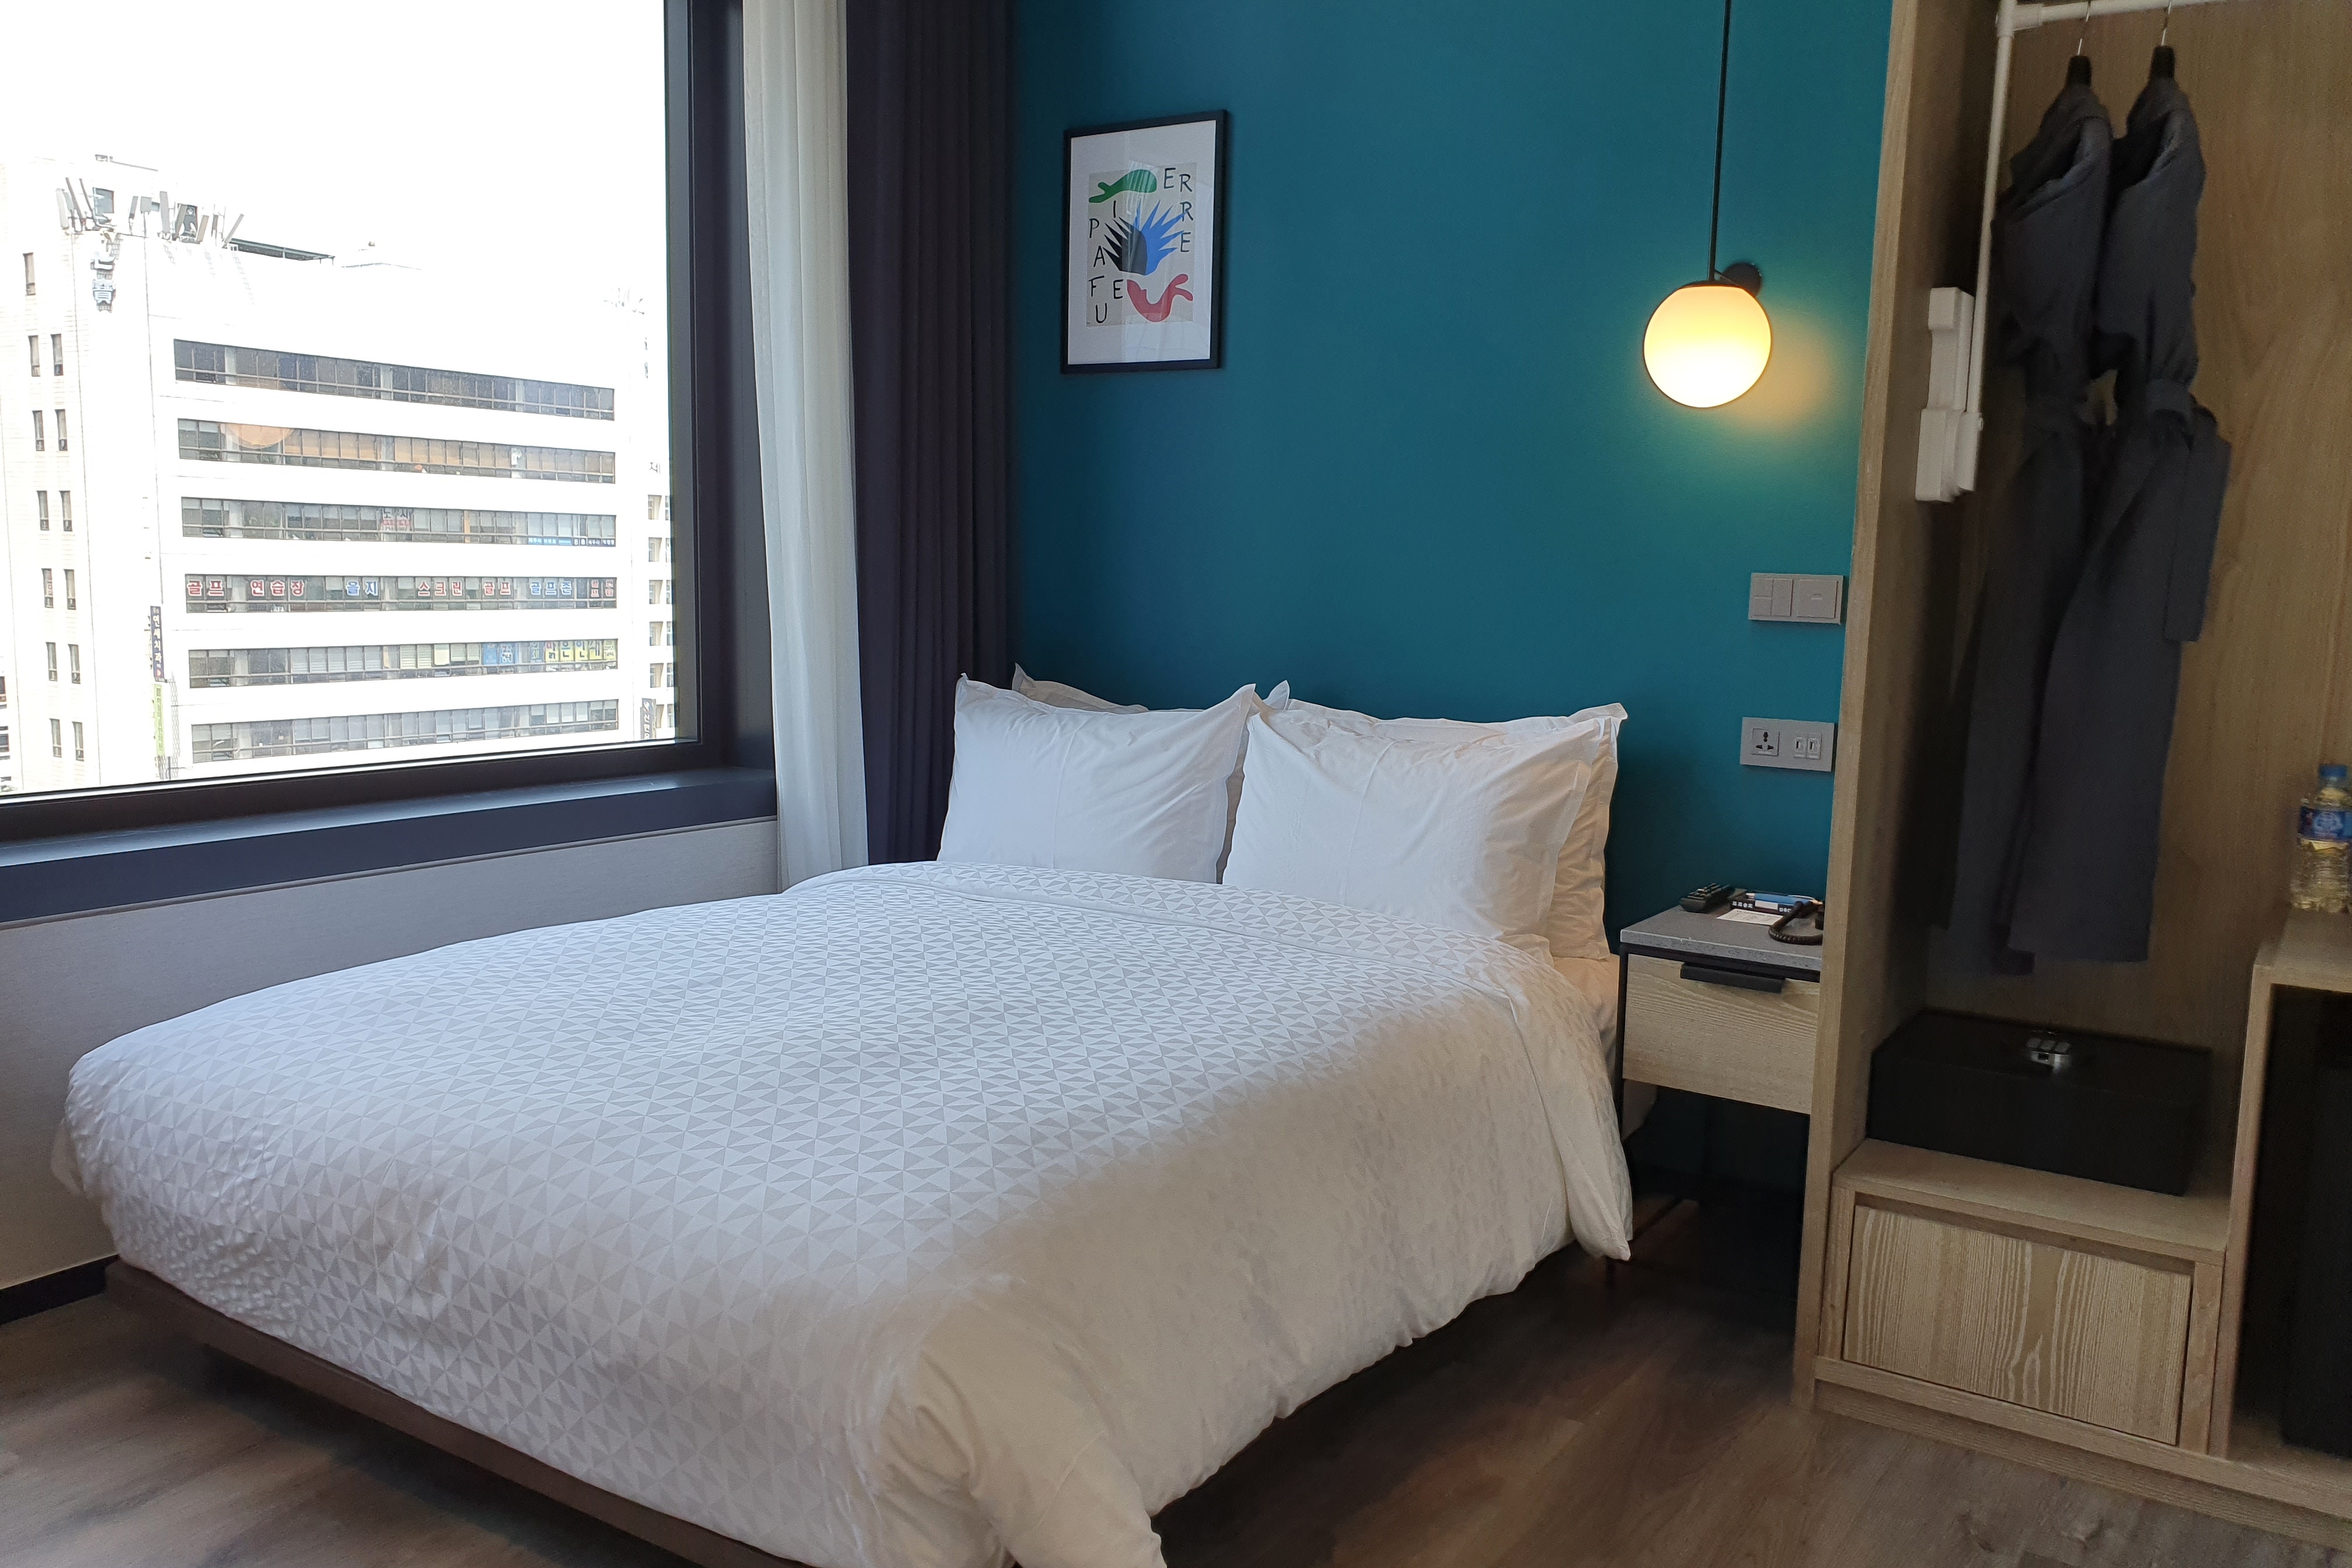 Accessible guestroom0 : Neat and modern hotel room